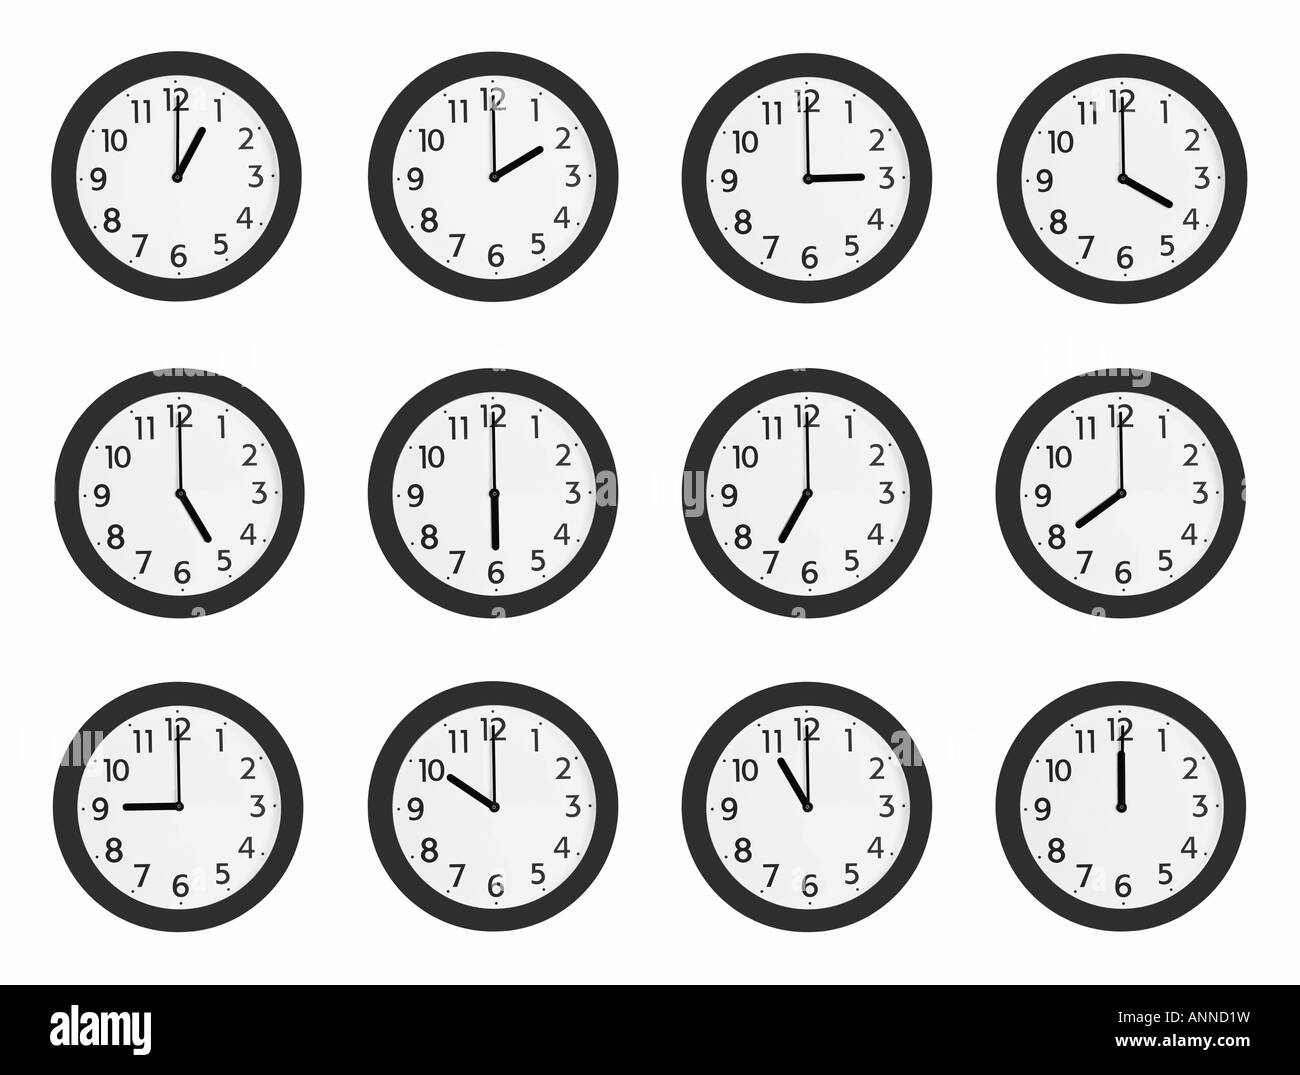 Sequence of clocks showing full hours Stock Photo